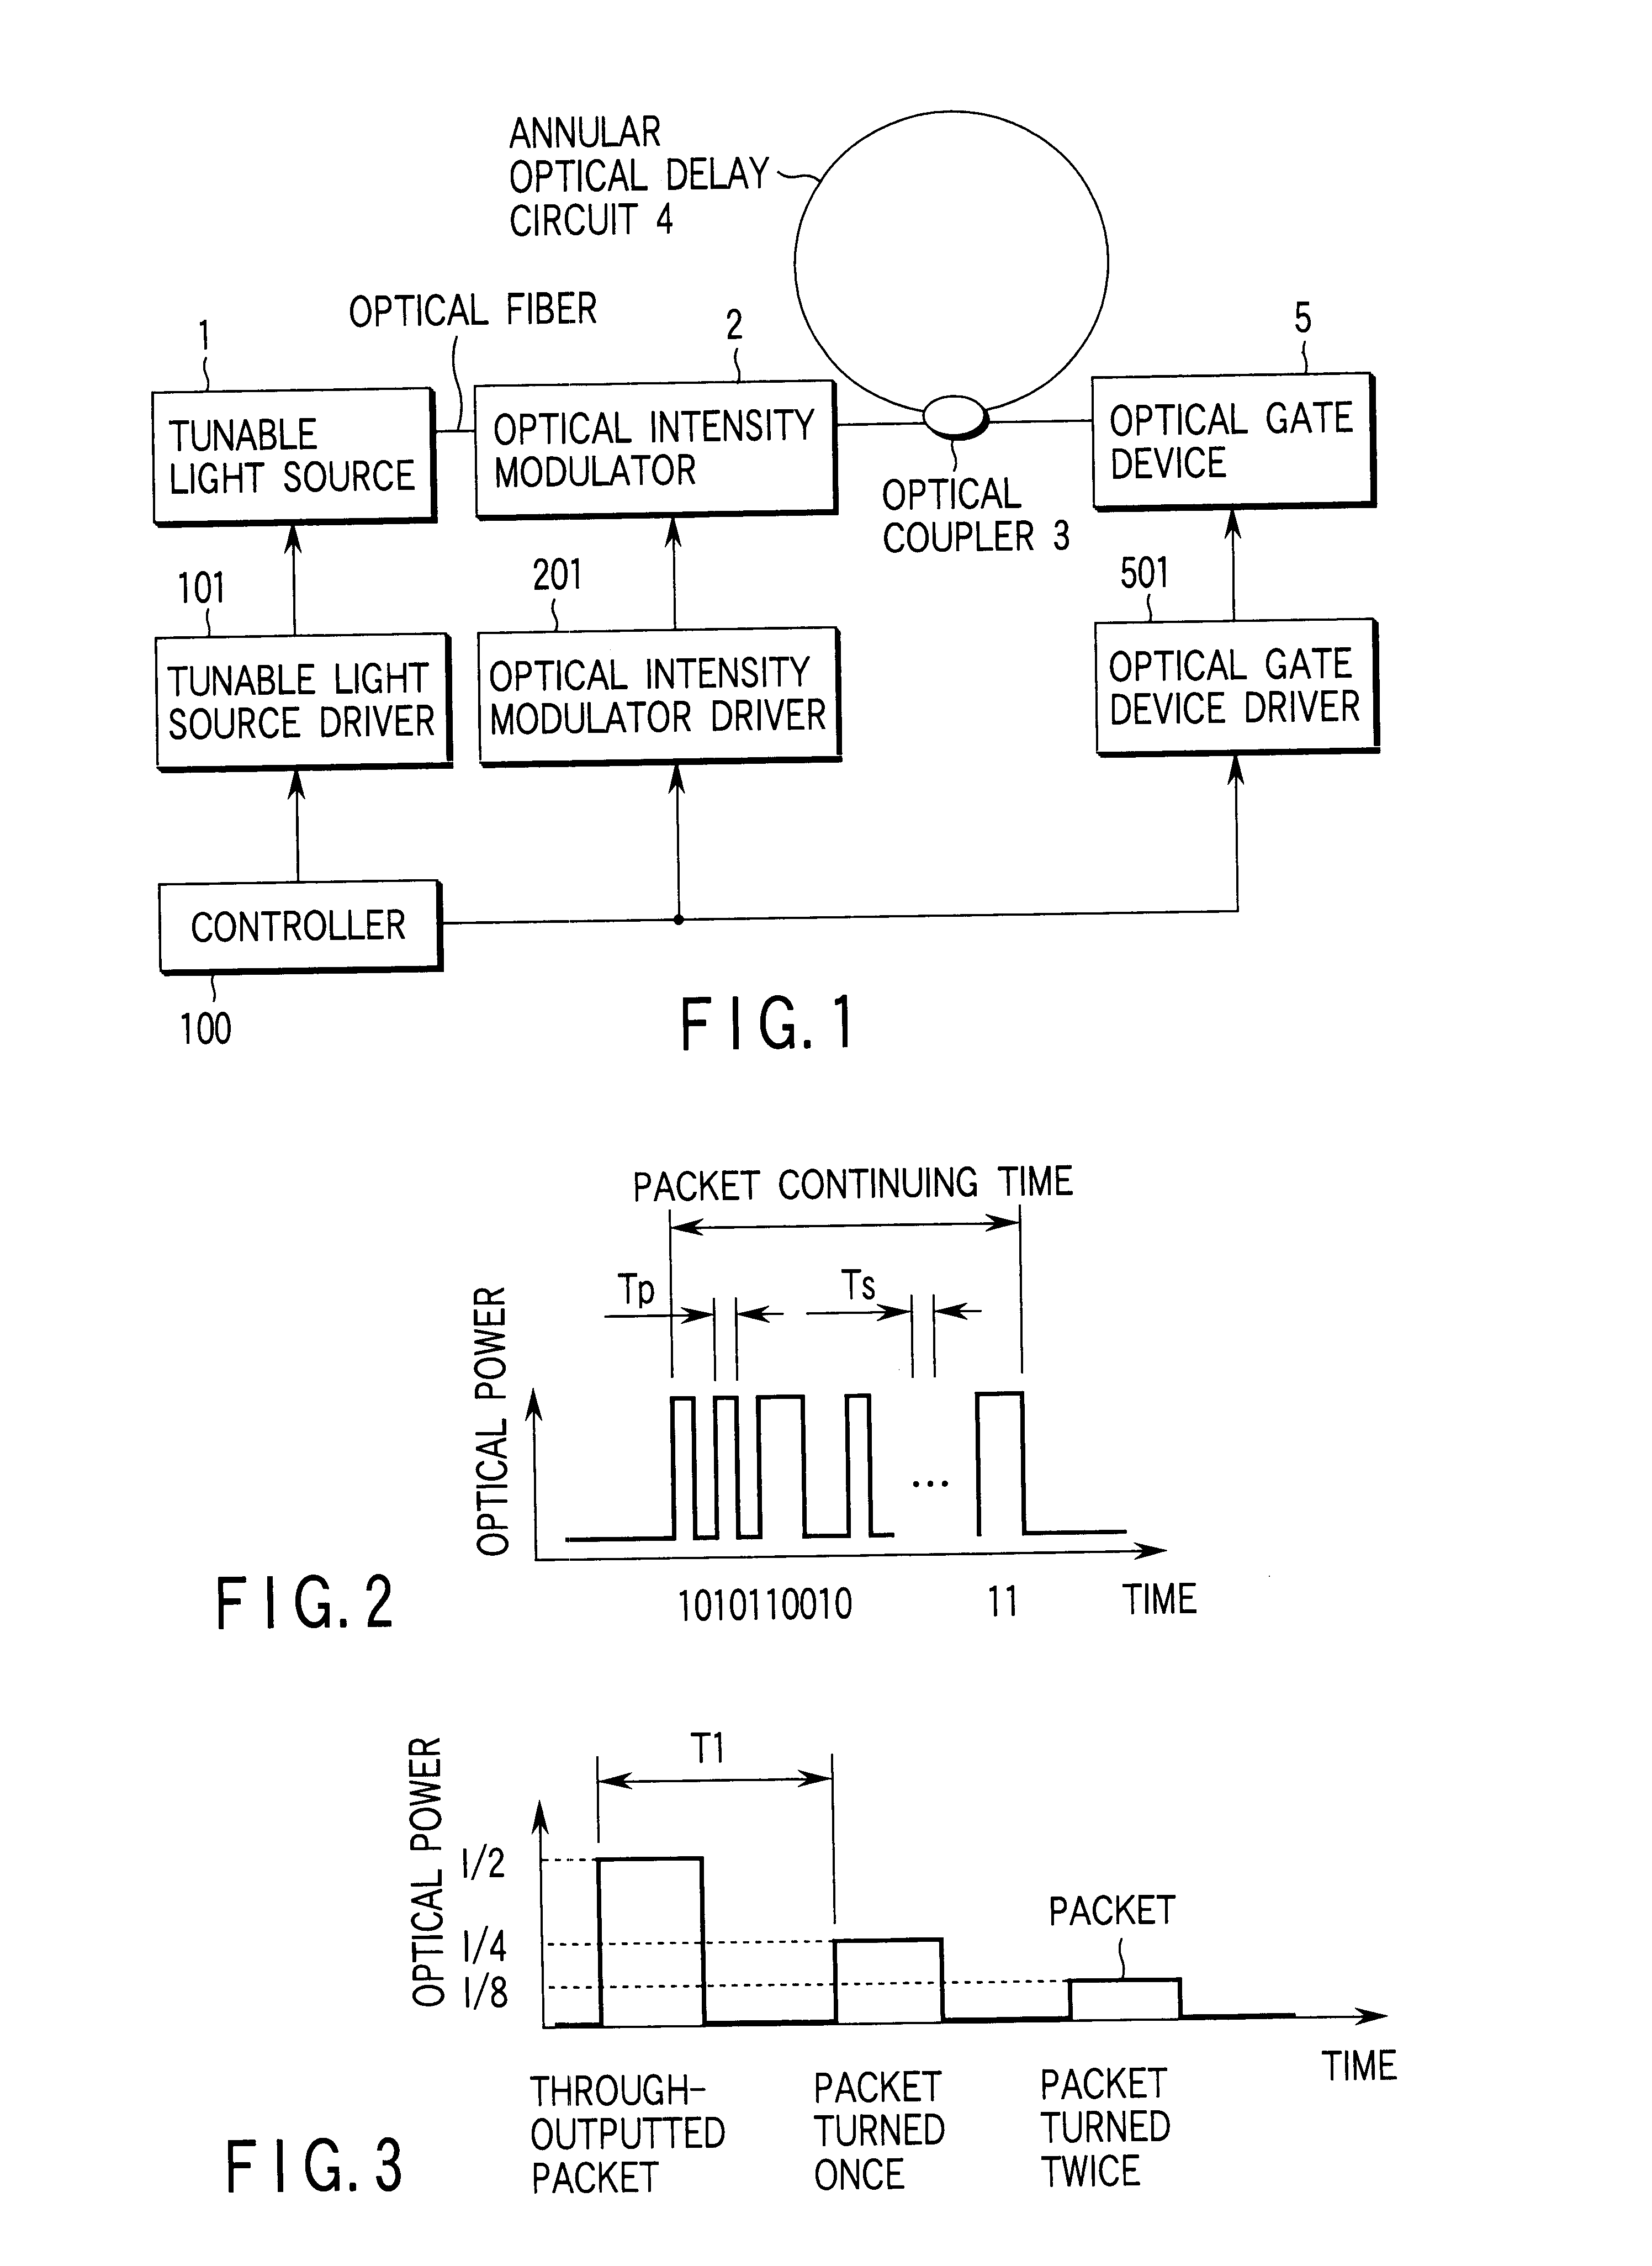 Multiwavelength light source device employing annular optical delay circuit